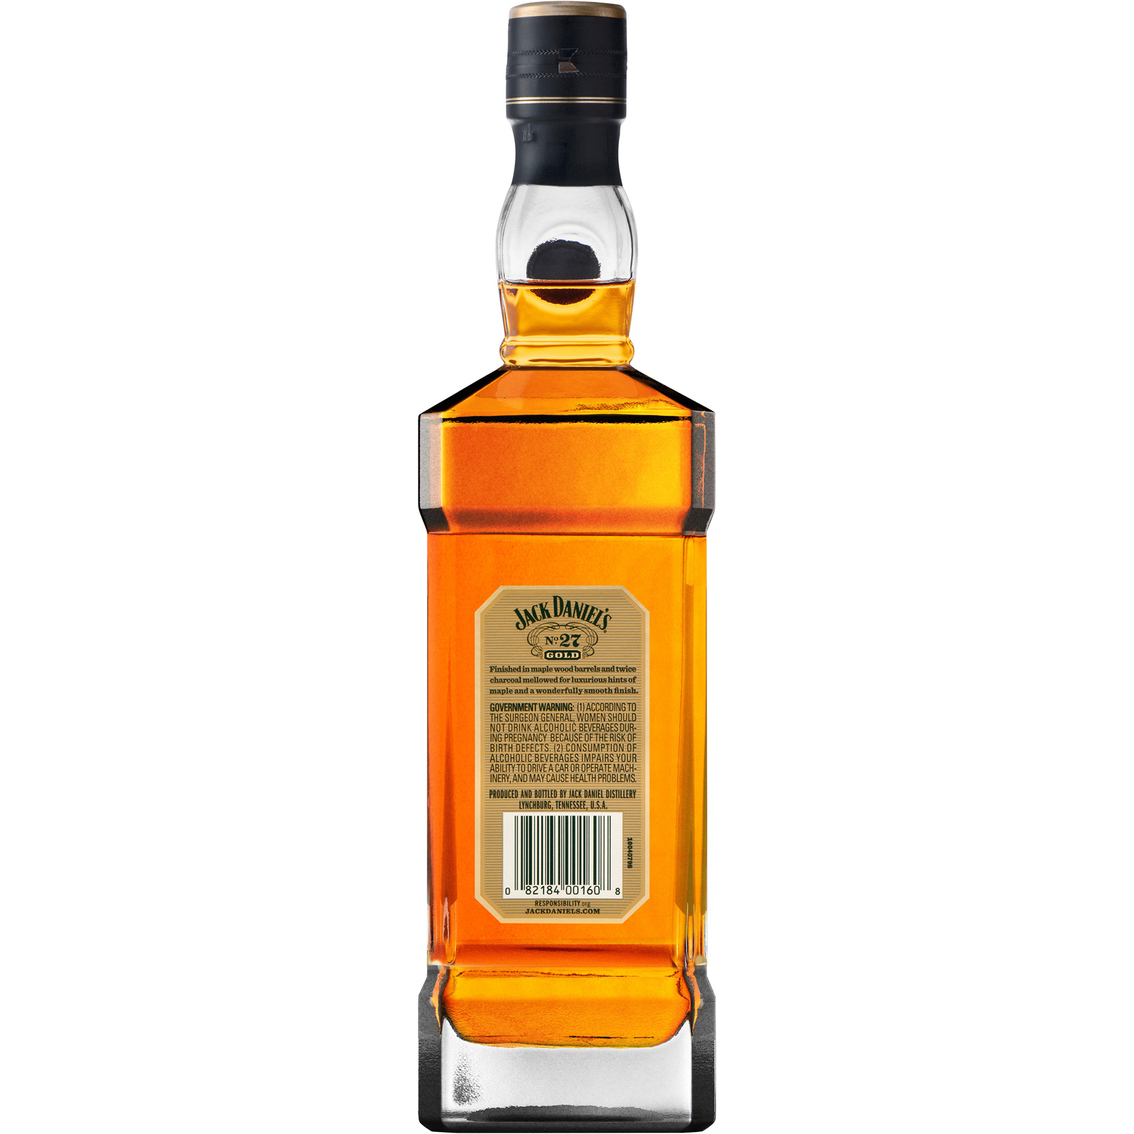 Jack Daniel's Gold No. 27 Tennessee Whiskey 750ml - Image 2 of 2